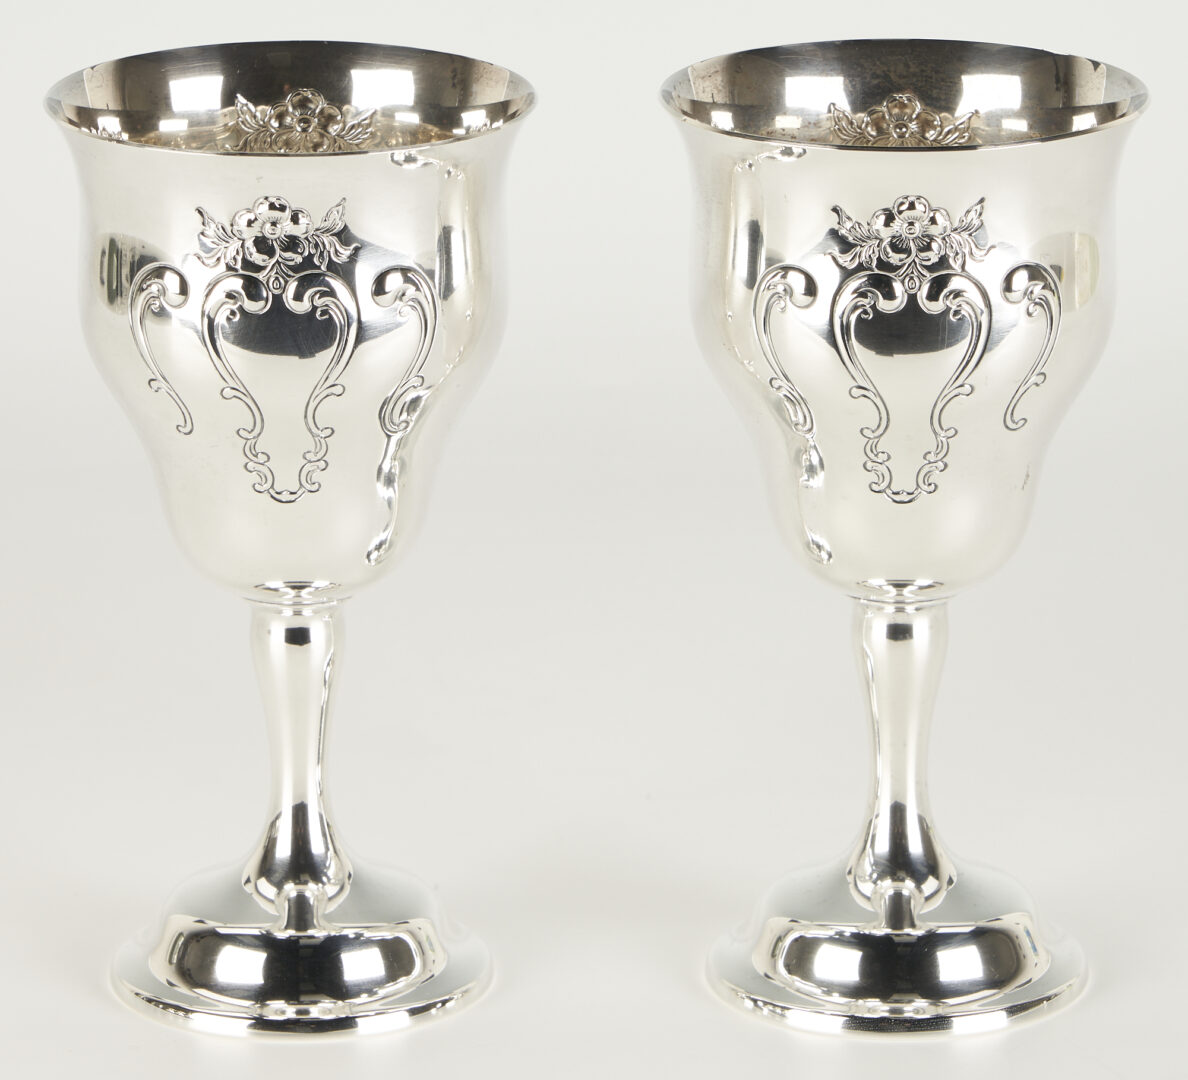 Lot 333: 8 Gorham Chantilly Countess Sterling Silver Goblets